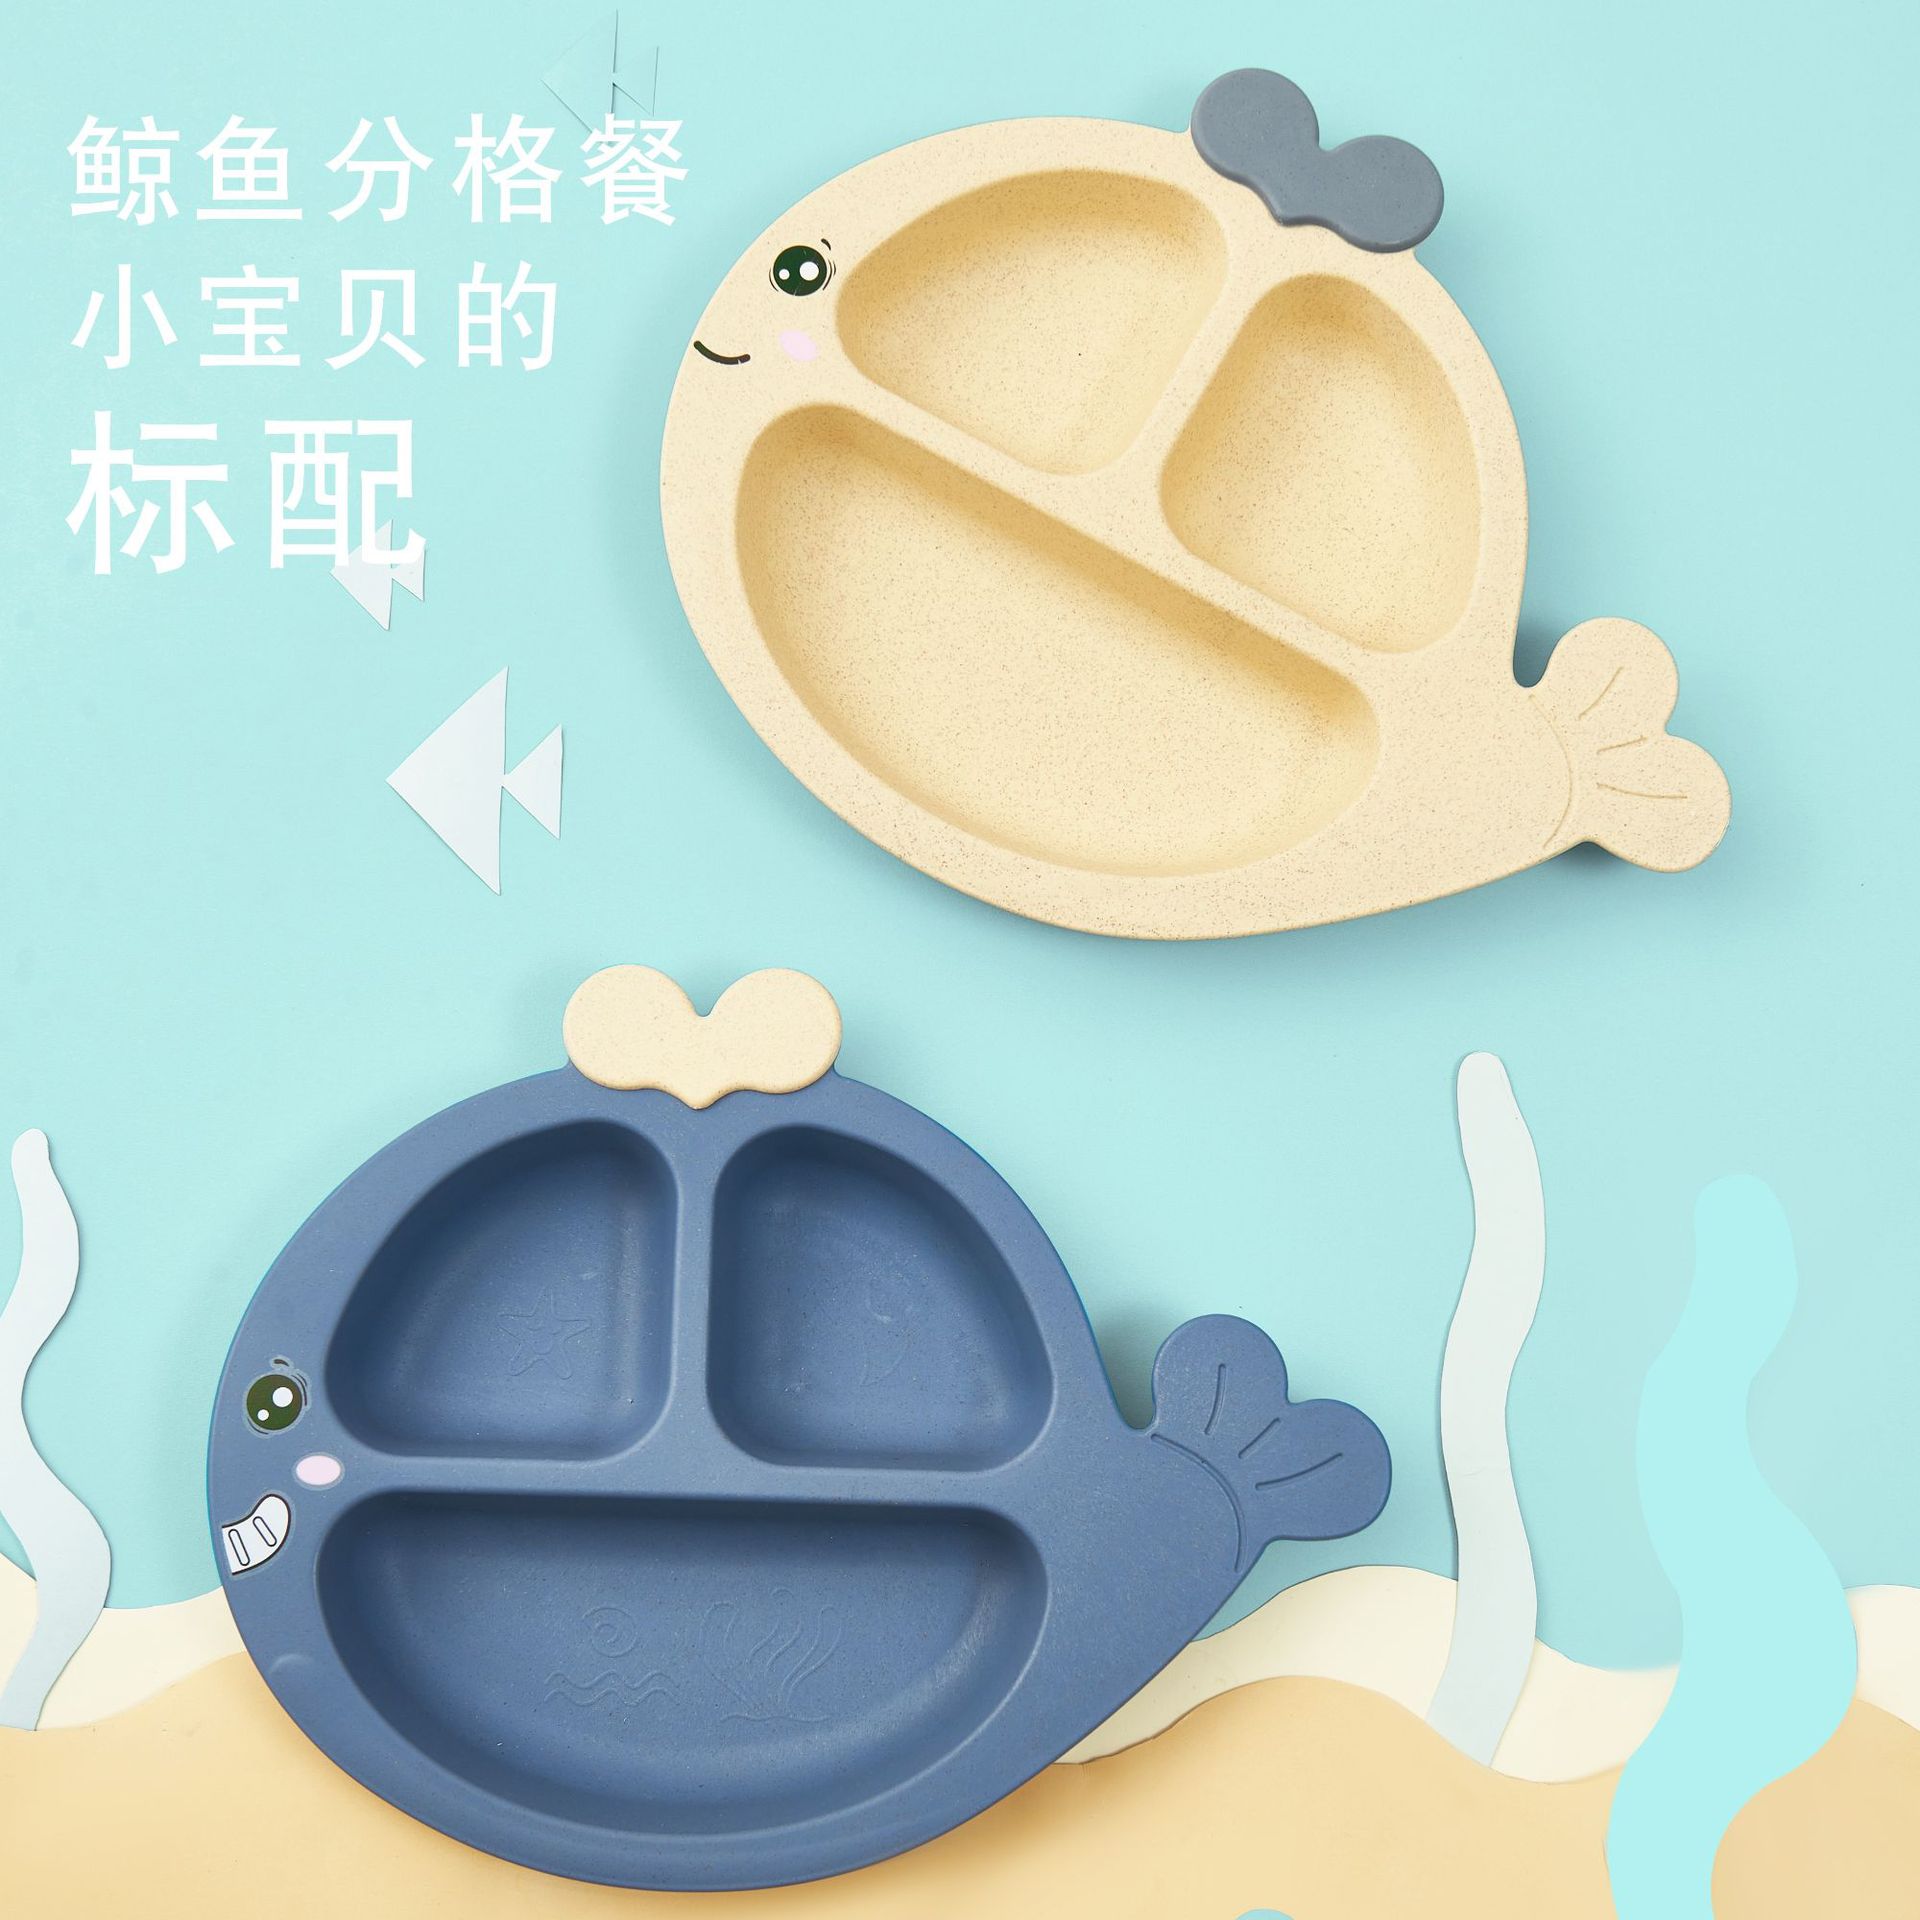 Whale Children's Dinner Plate Cartoon Compartment Primary School Student Eating Bowl Kindergarten Baby Bowl and Chopsticks Anti-Fall Tableware Set